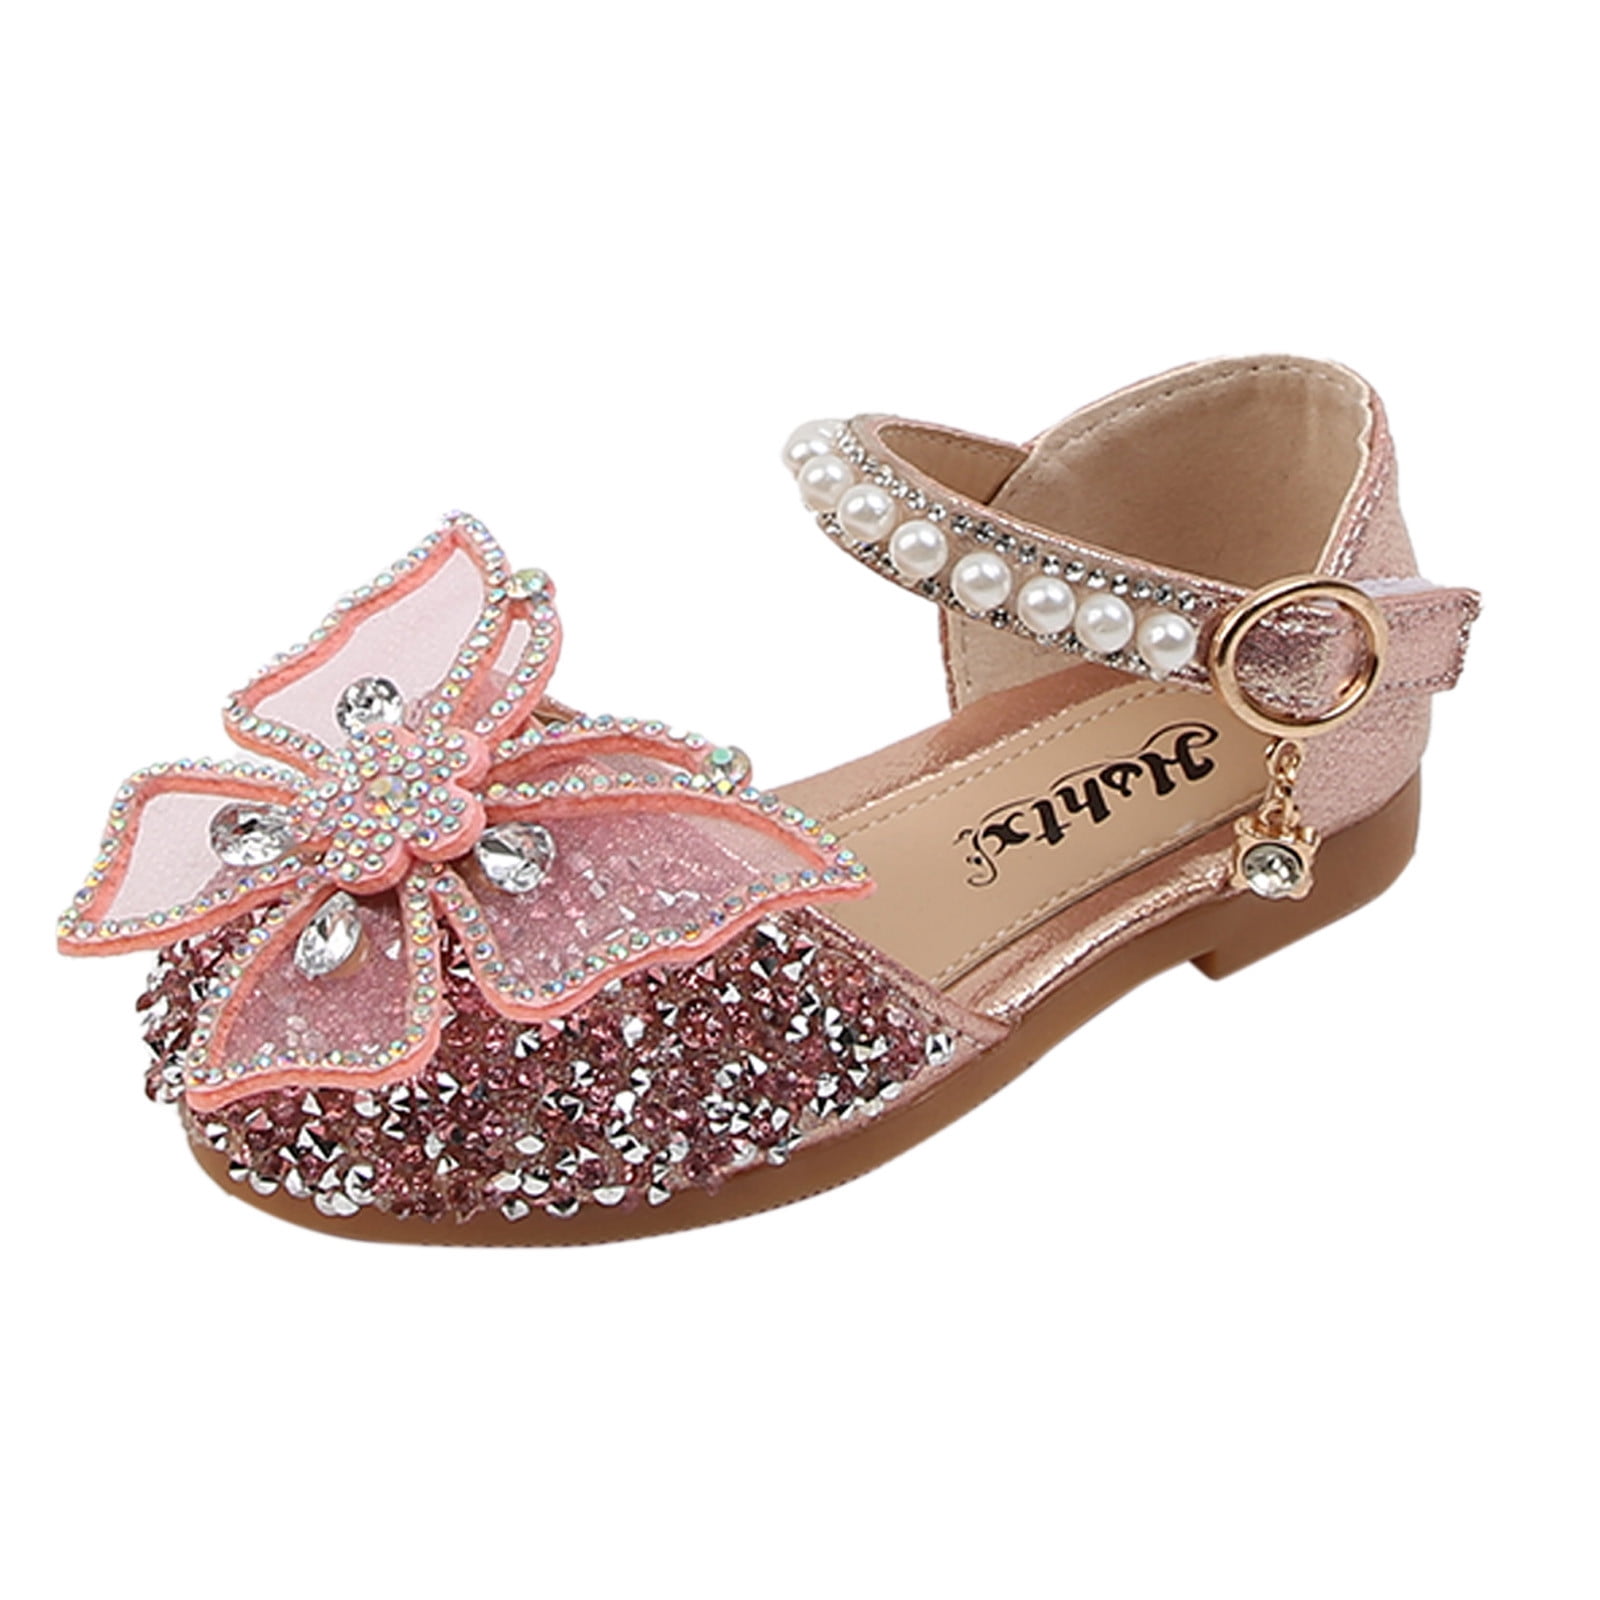 Infant Kids Baby Girls Crystal Bling Bowknot Single Princess Shoes Sandals US